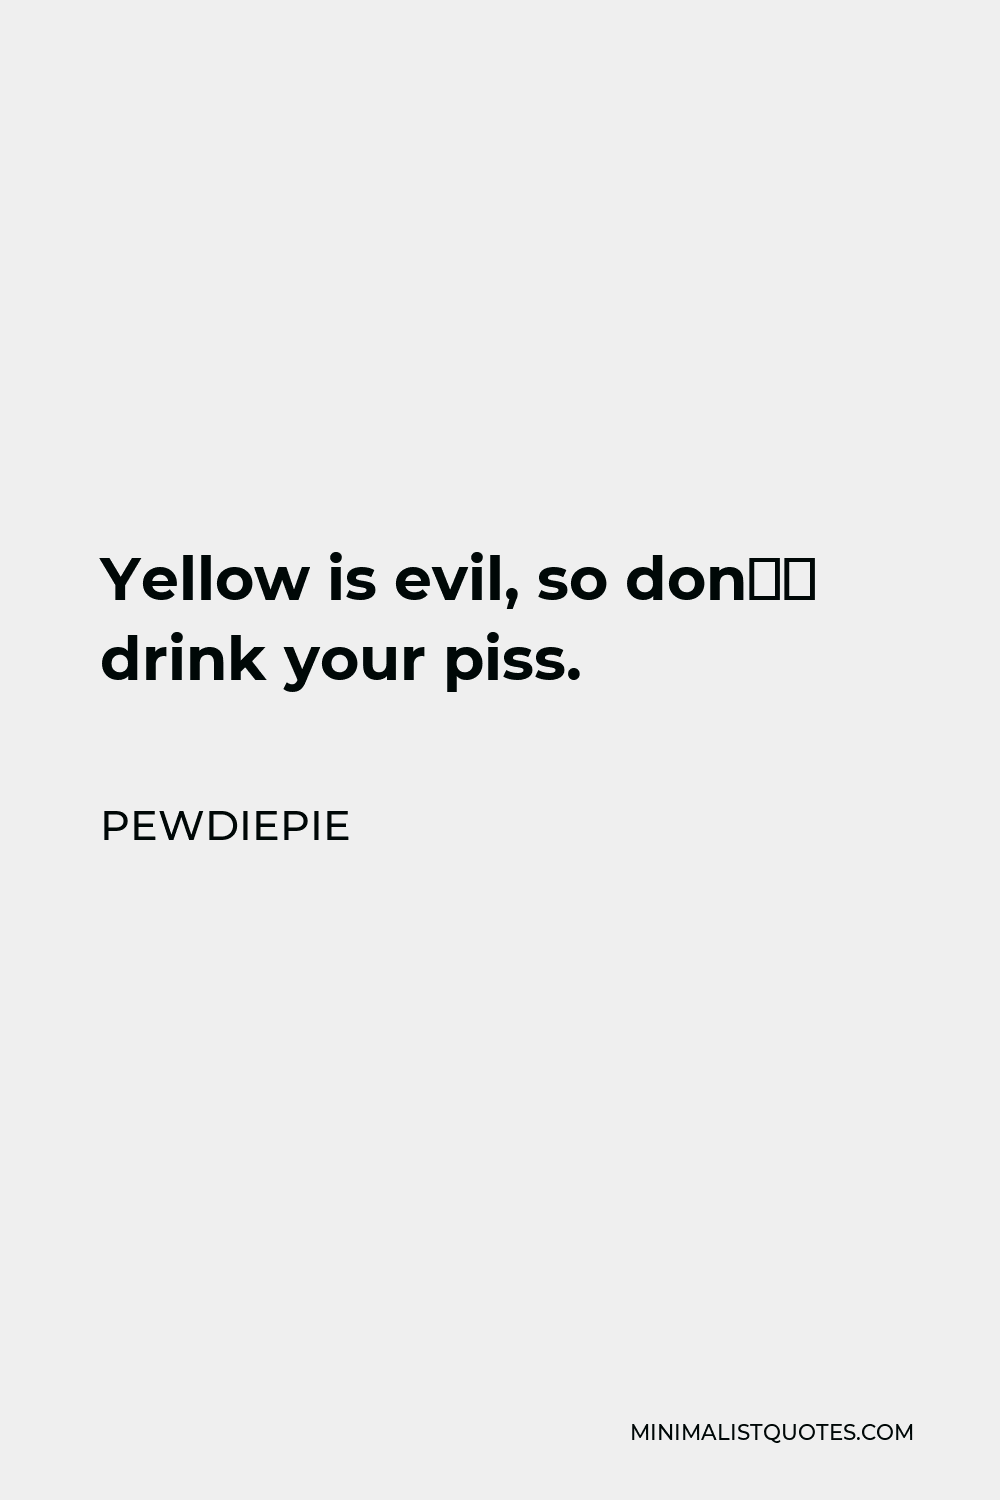 PewDiePie Quote - Yellow is evil, so don’t drink your piss.